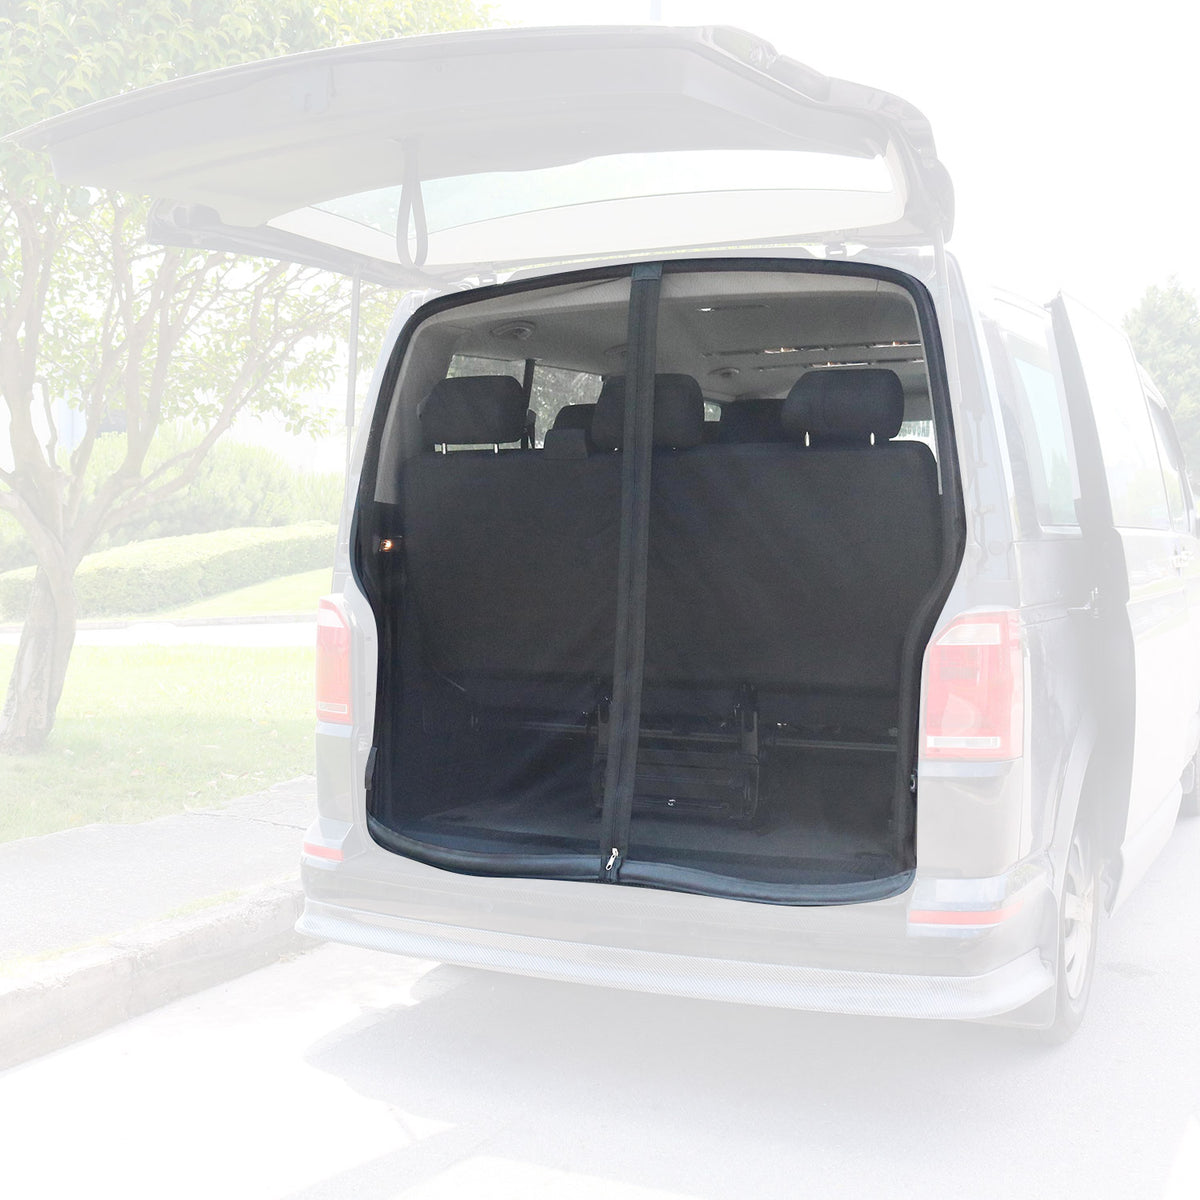 Mosquito net magnetic insect protection for VW Transporter T4 1990-2003 tailgate